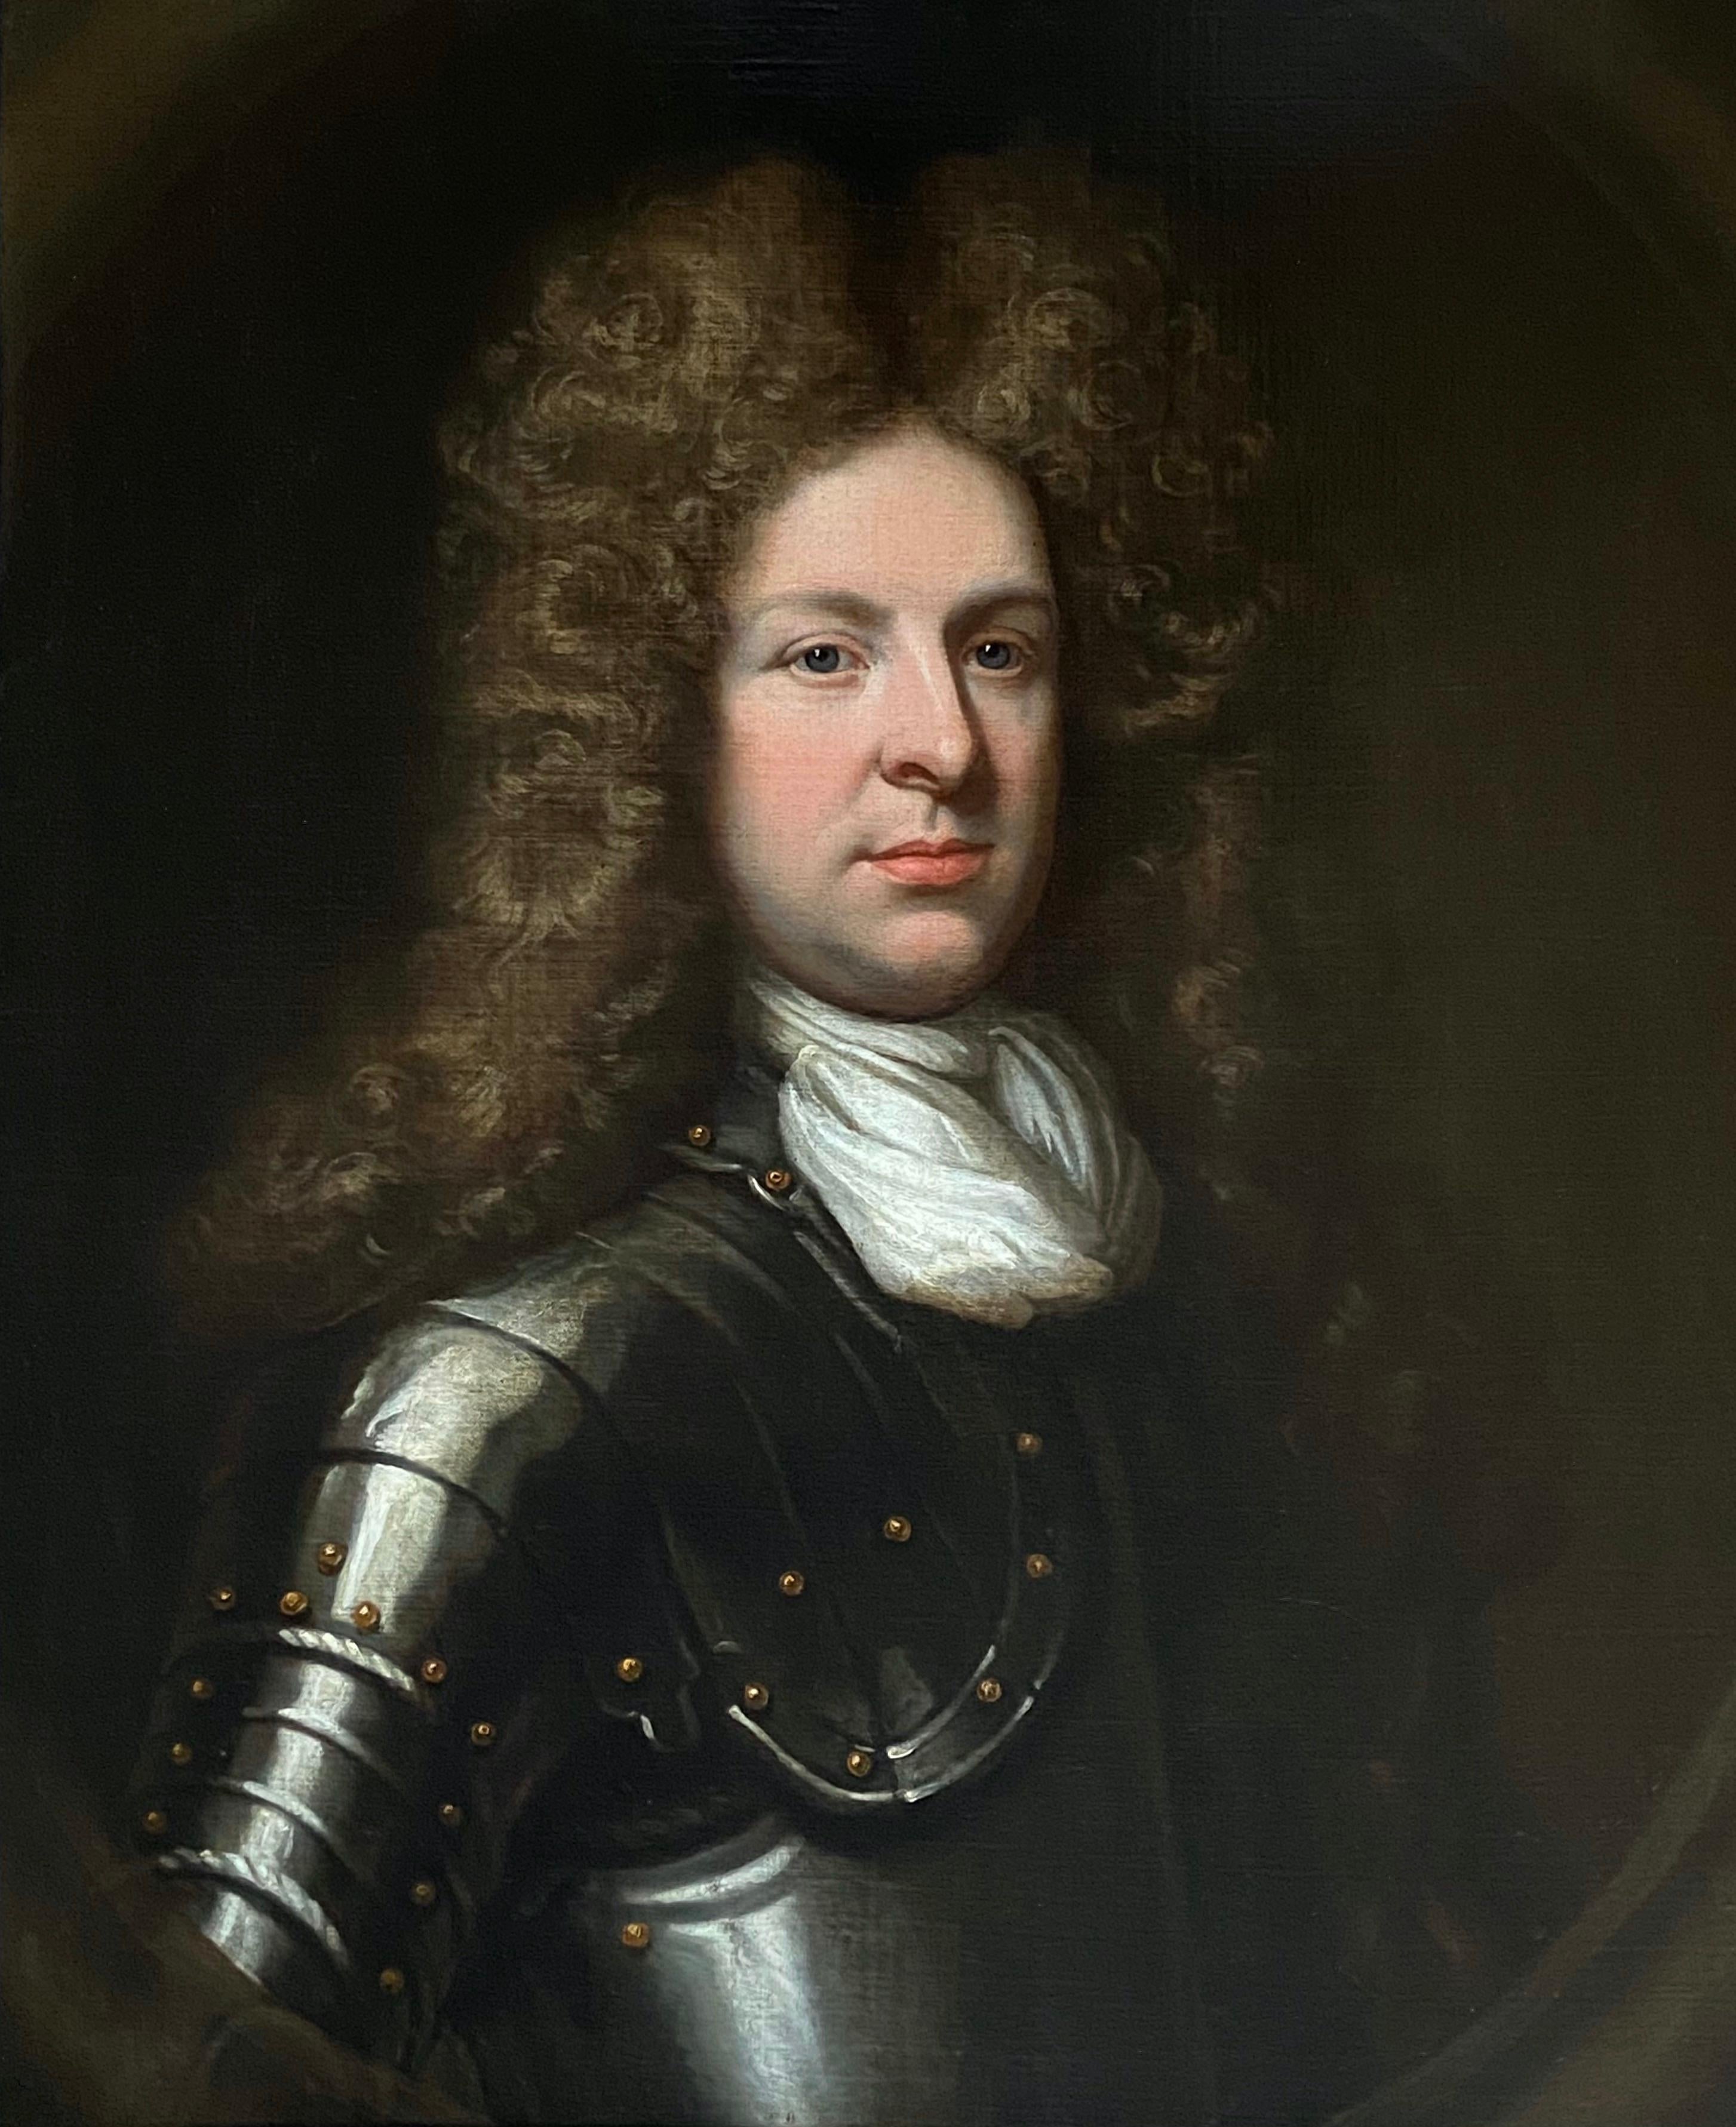 (Circle of) Godfrey Kneller Interior Painting - 17th English Old Master Oil Portrait of a Young Gentleman in Armour circa 1690.